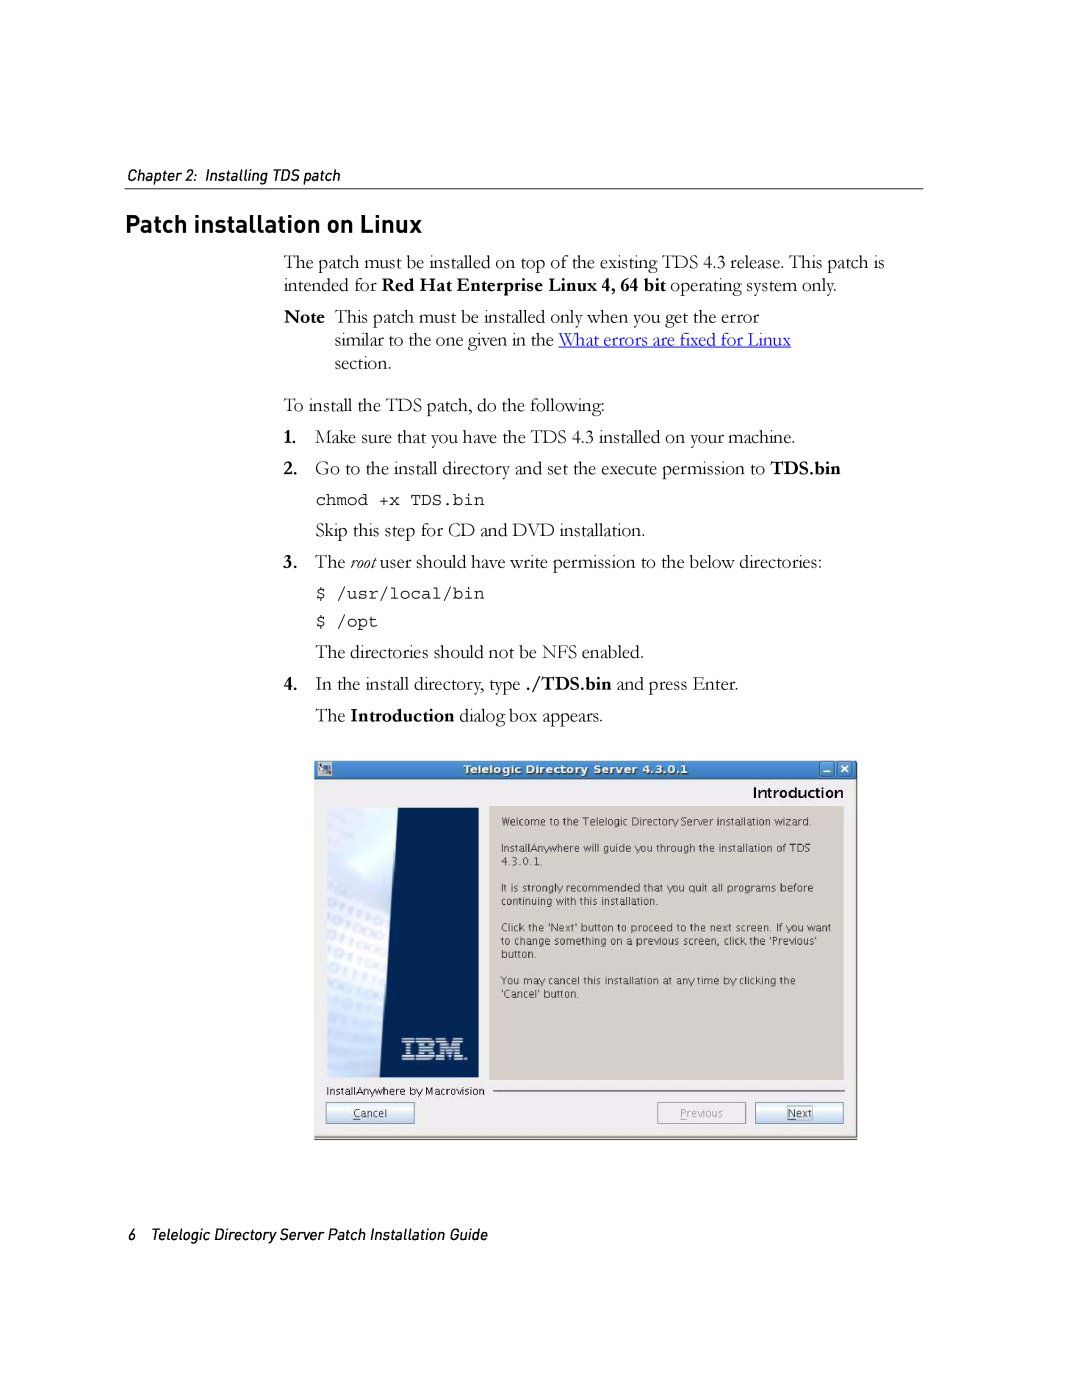 IBM Telelogic Directory Server manual Patch installation on Linux 